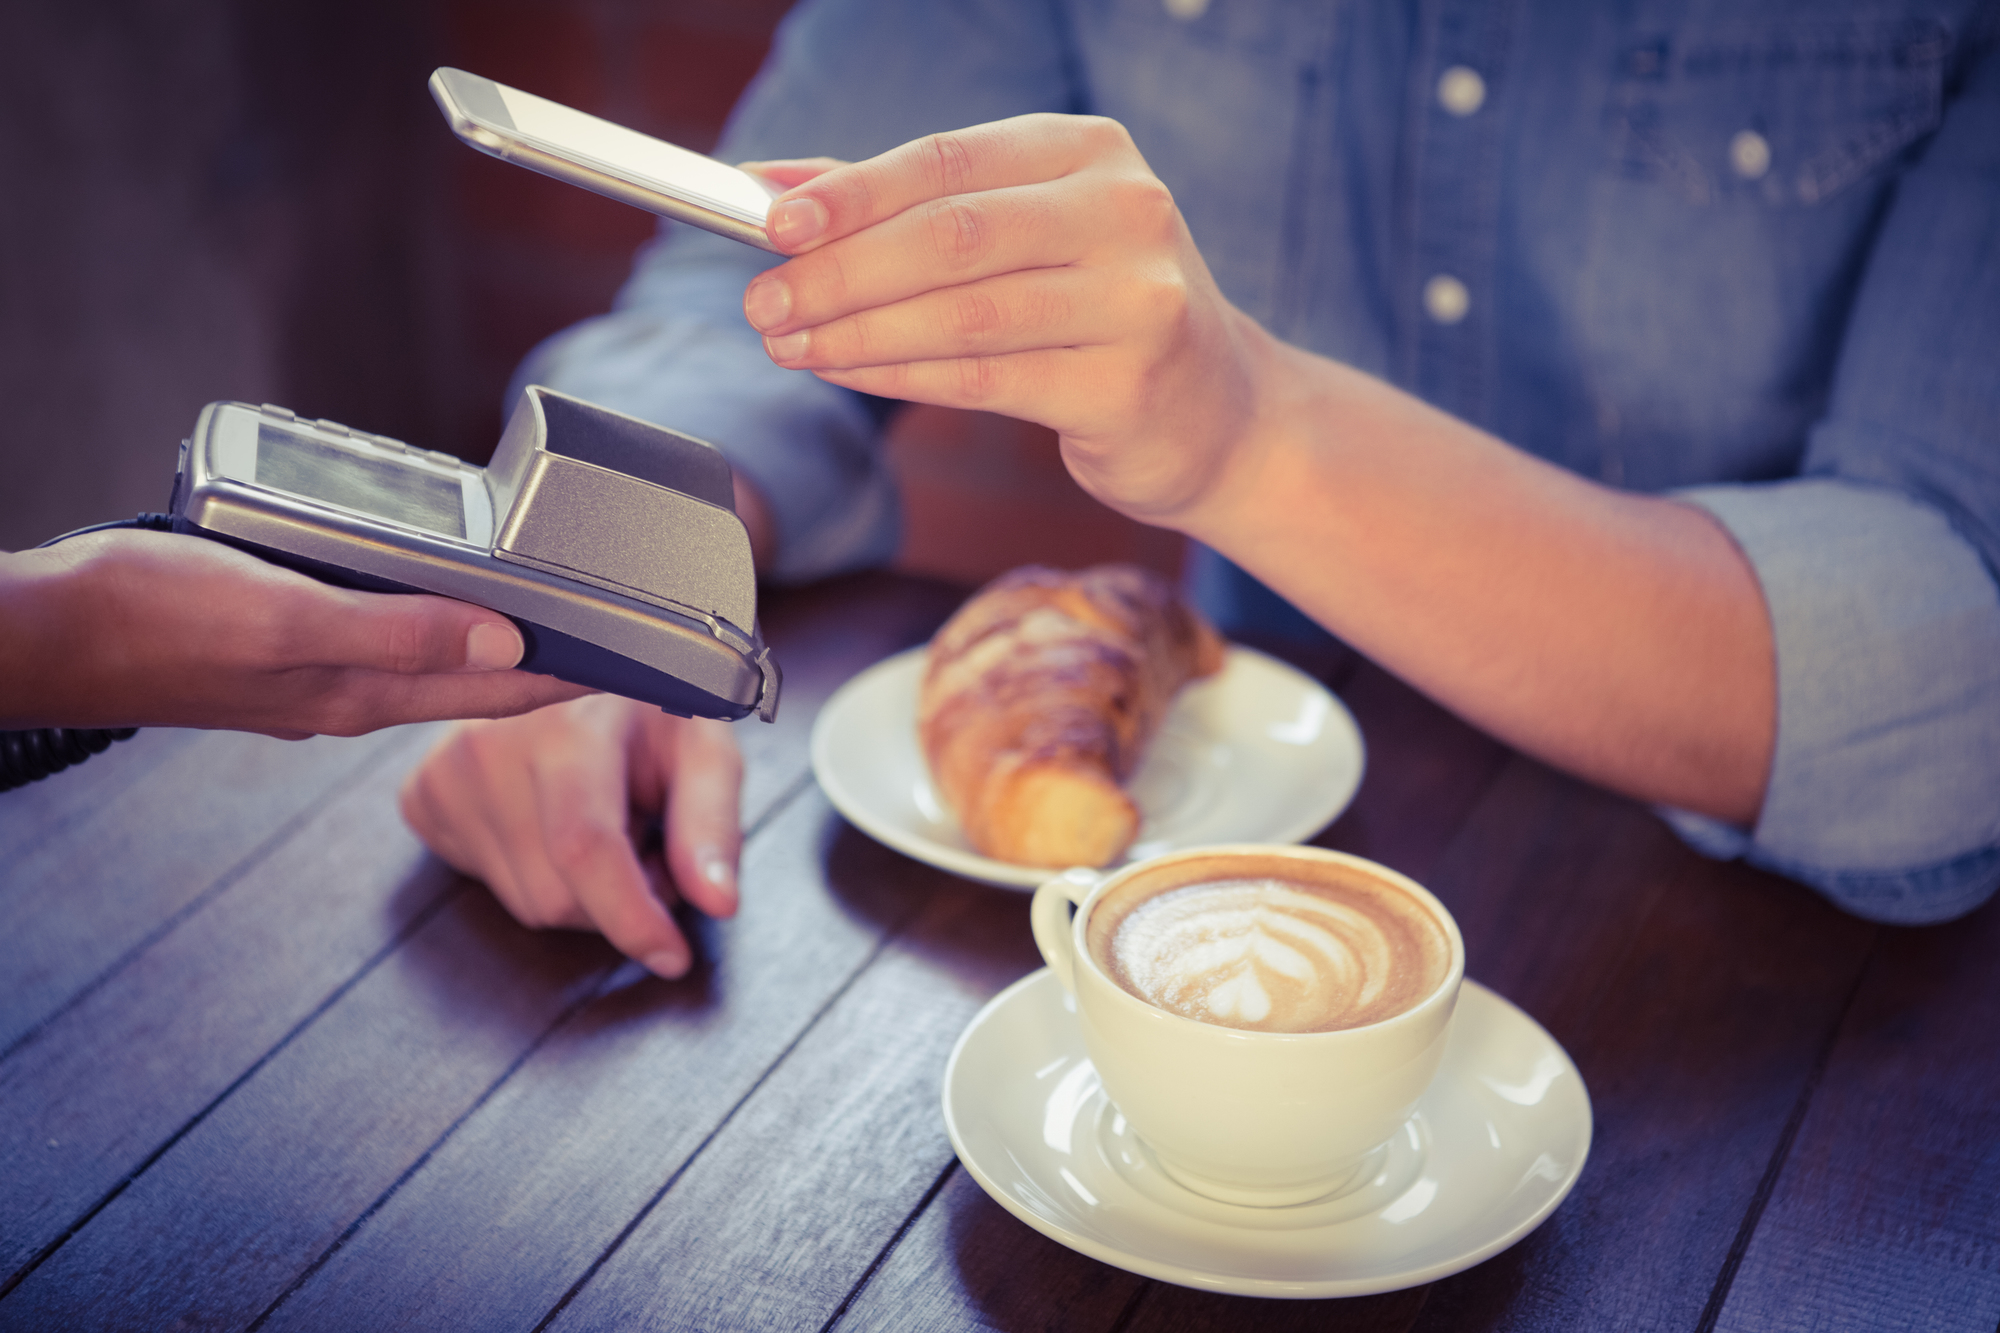 Male customer paying with smartphone at coffee shop